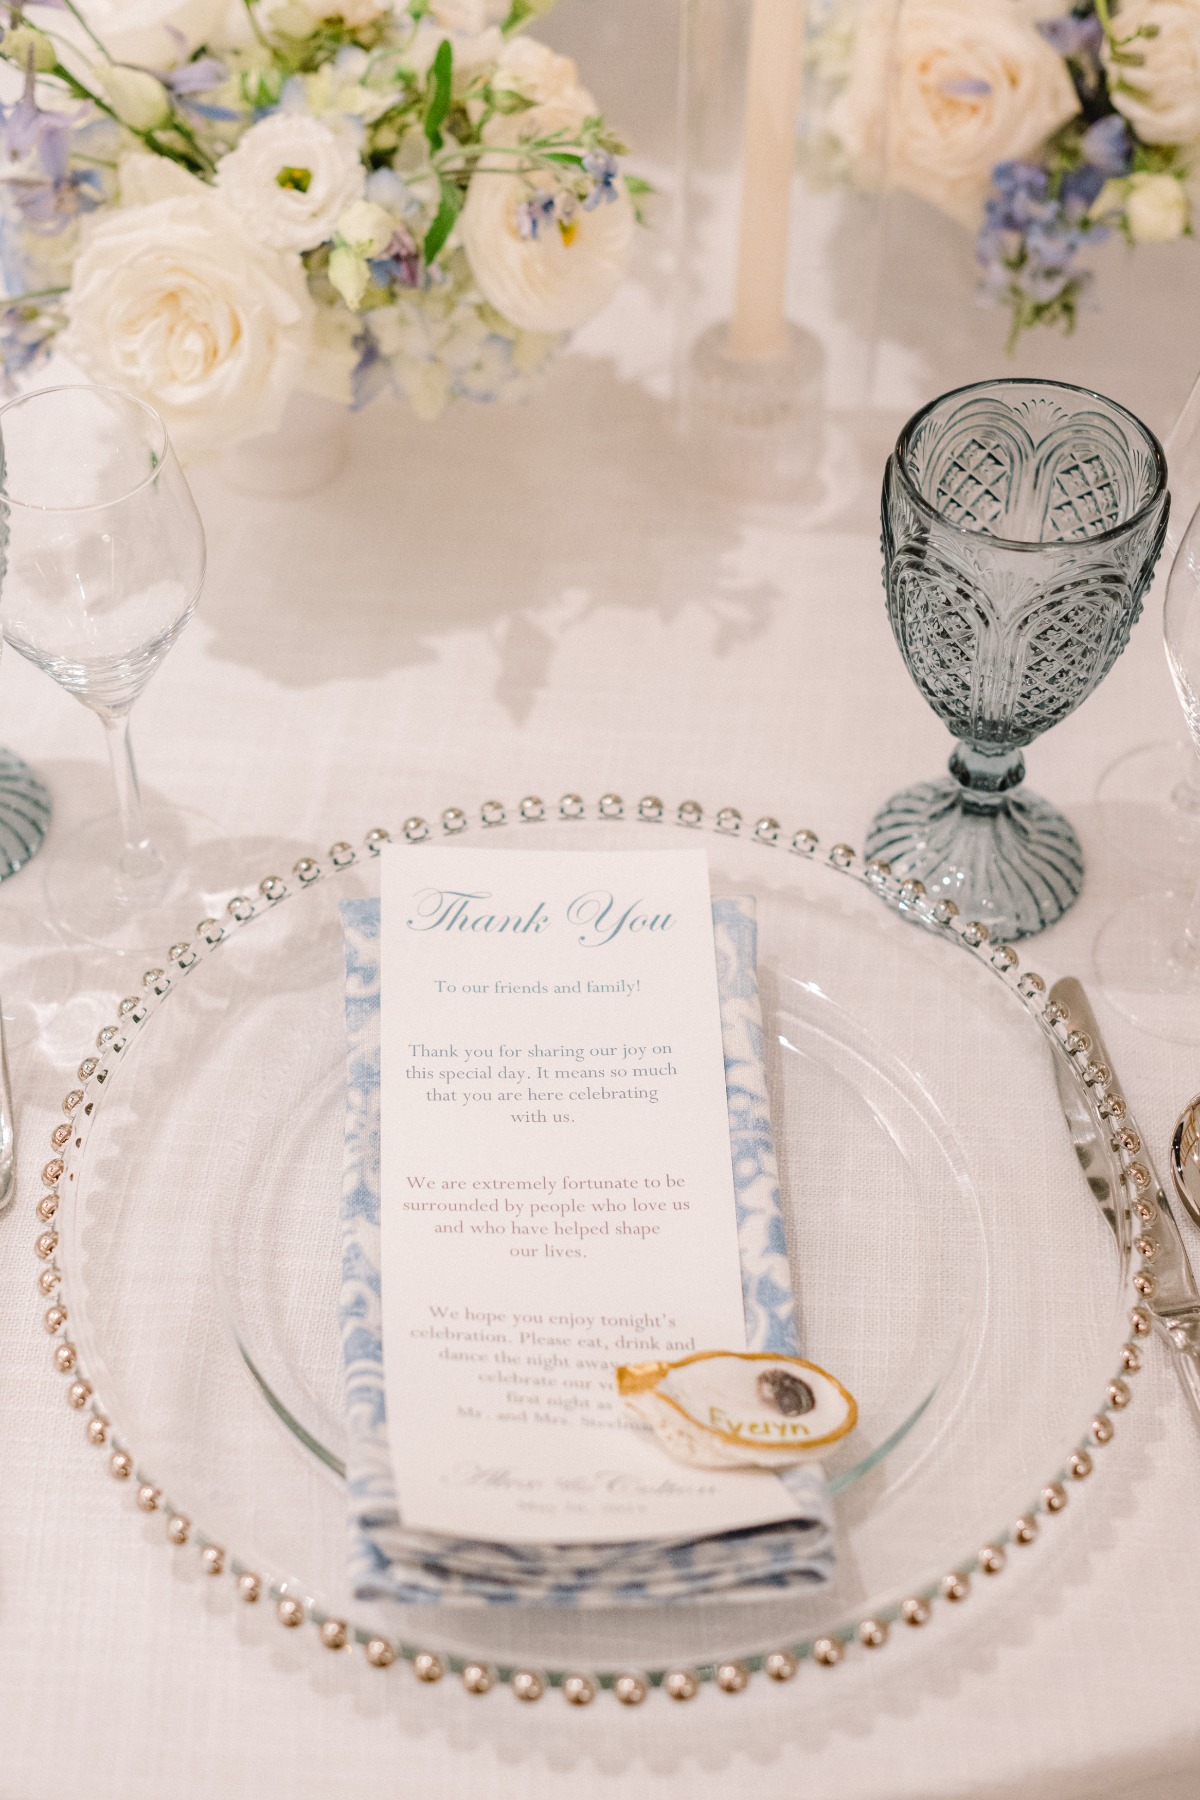 Timeless vintage inspired reception table setting for wedding